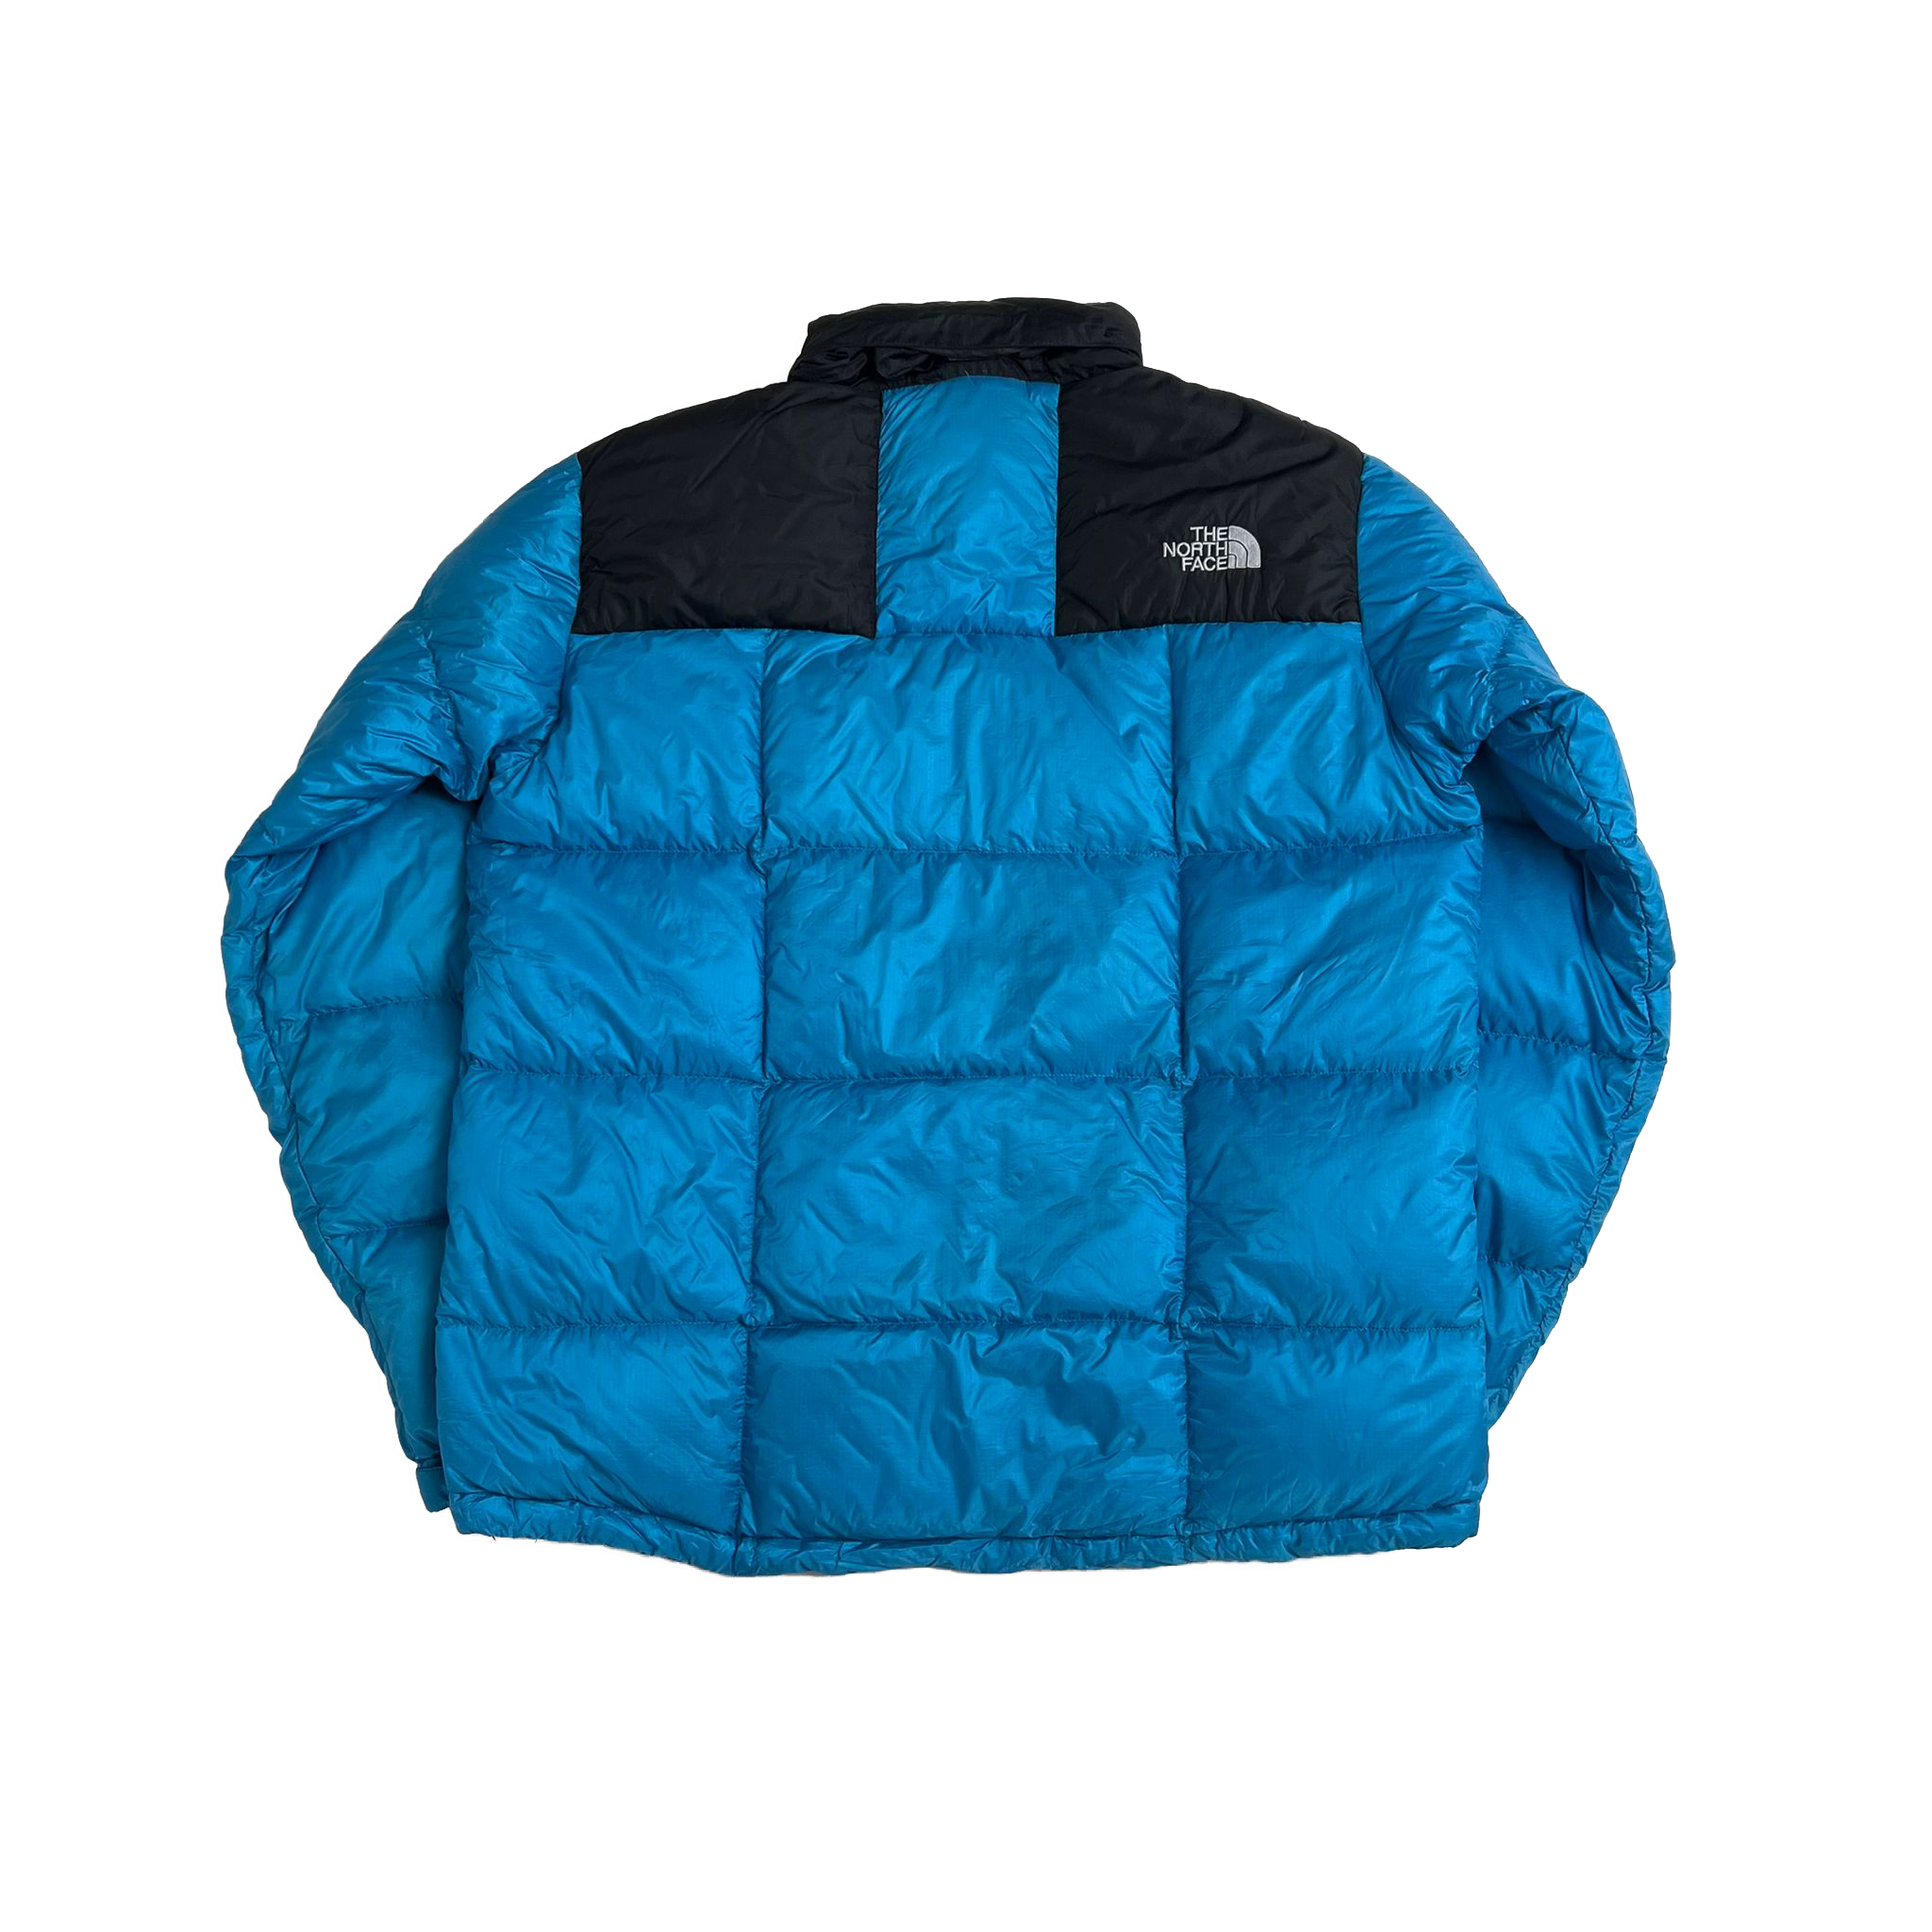 The North Face Summit Series 800 puffer